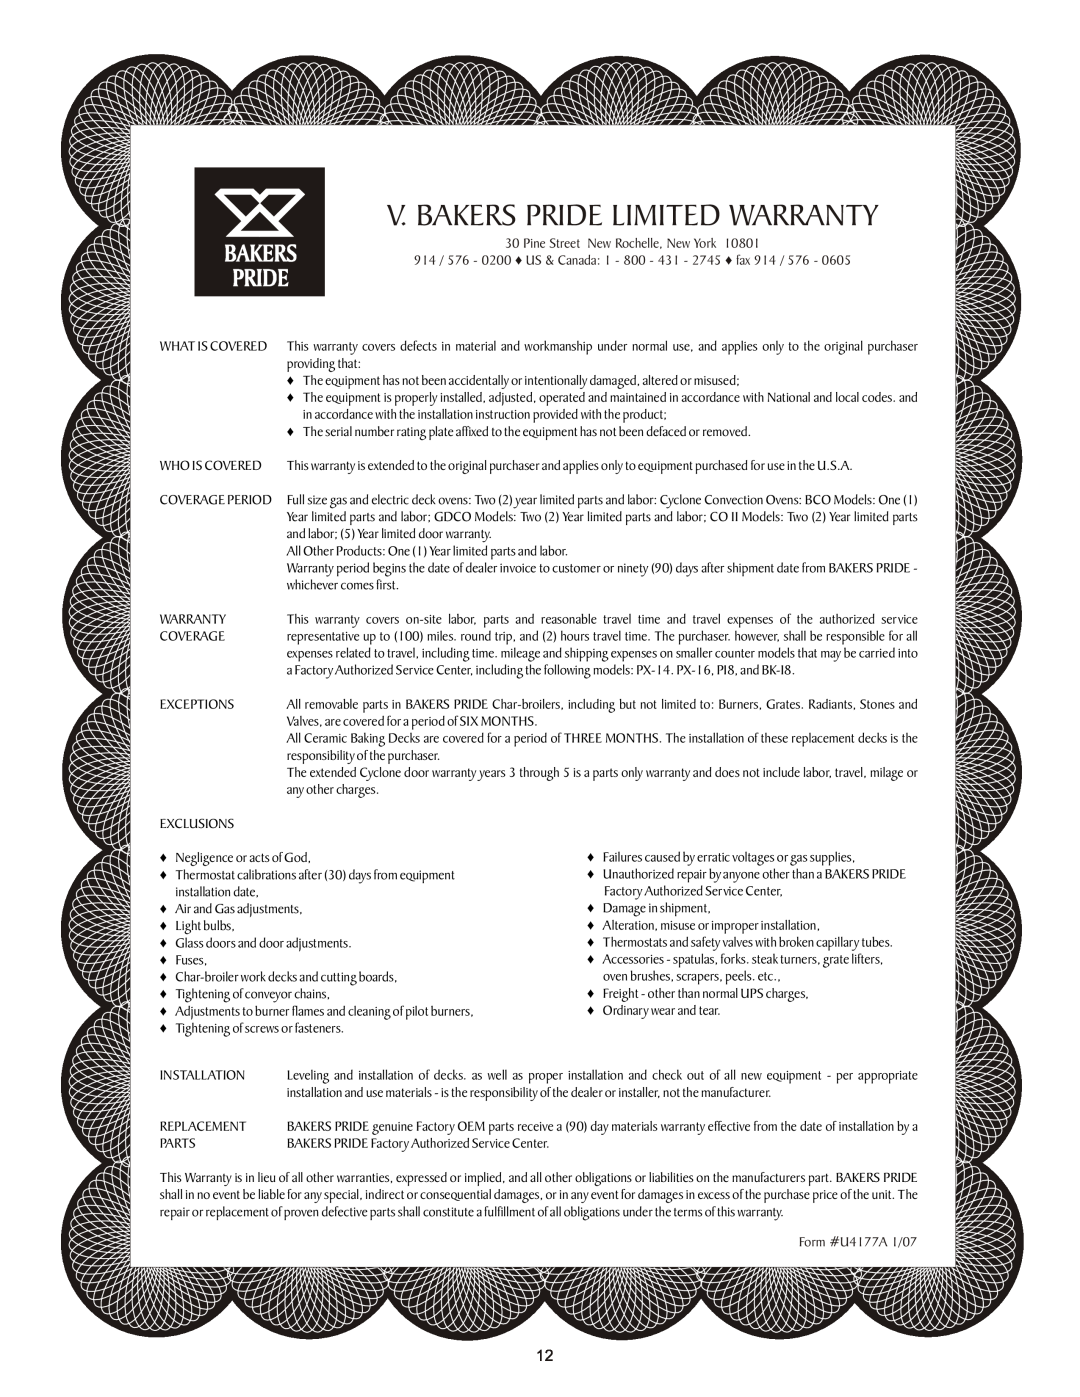 Bakers Pride Oven XXE manual V. Bakers Pride Limited Warranty, Pine Street New Rochelle, New York, Form #U4177A 1/07 